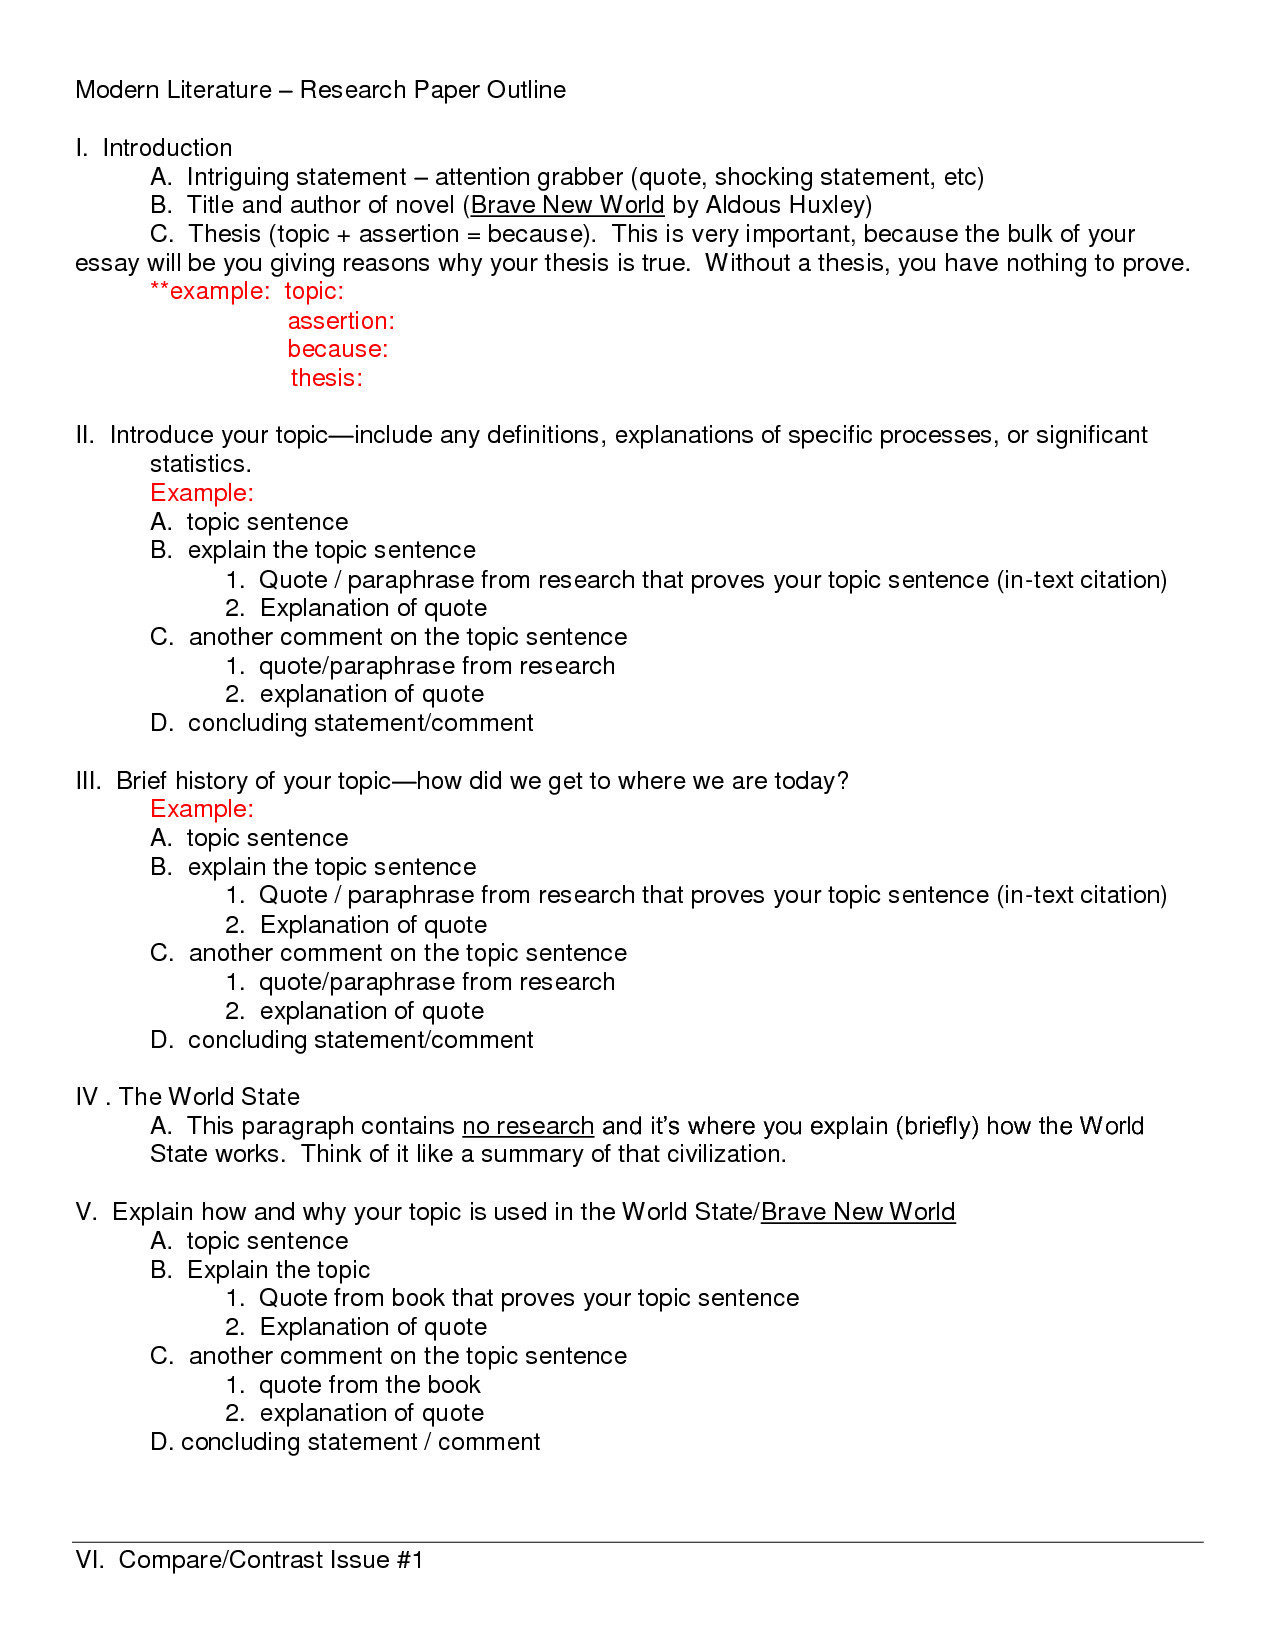 Mla Research Paper Outline Template gALwrdxG